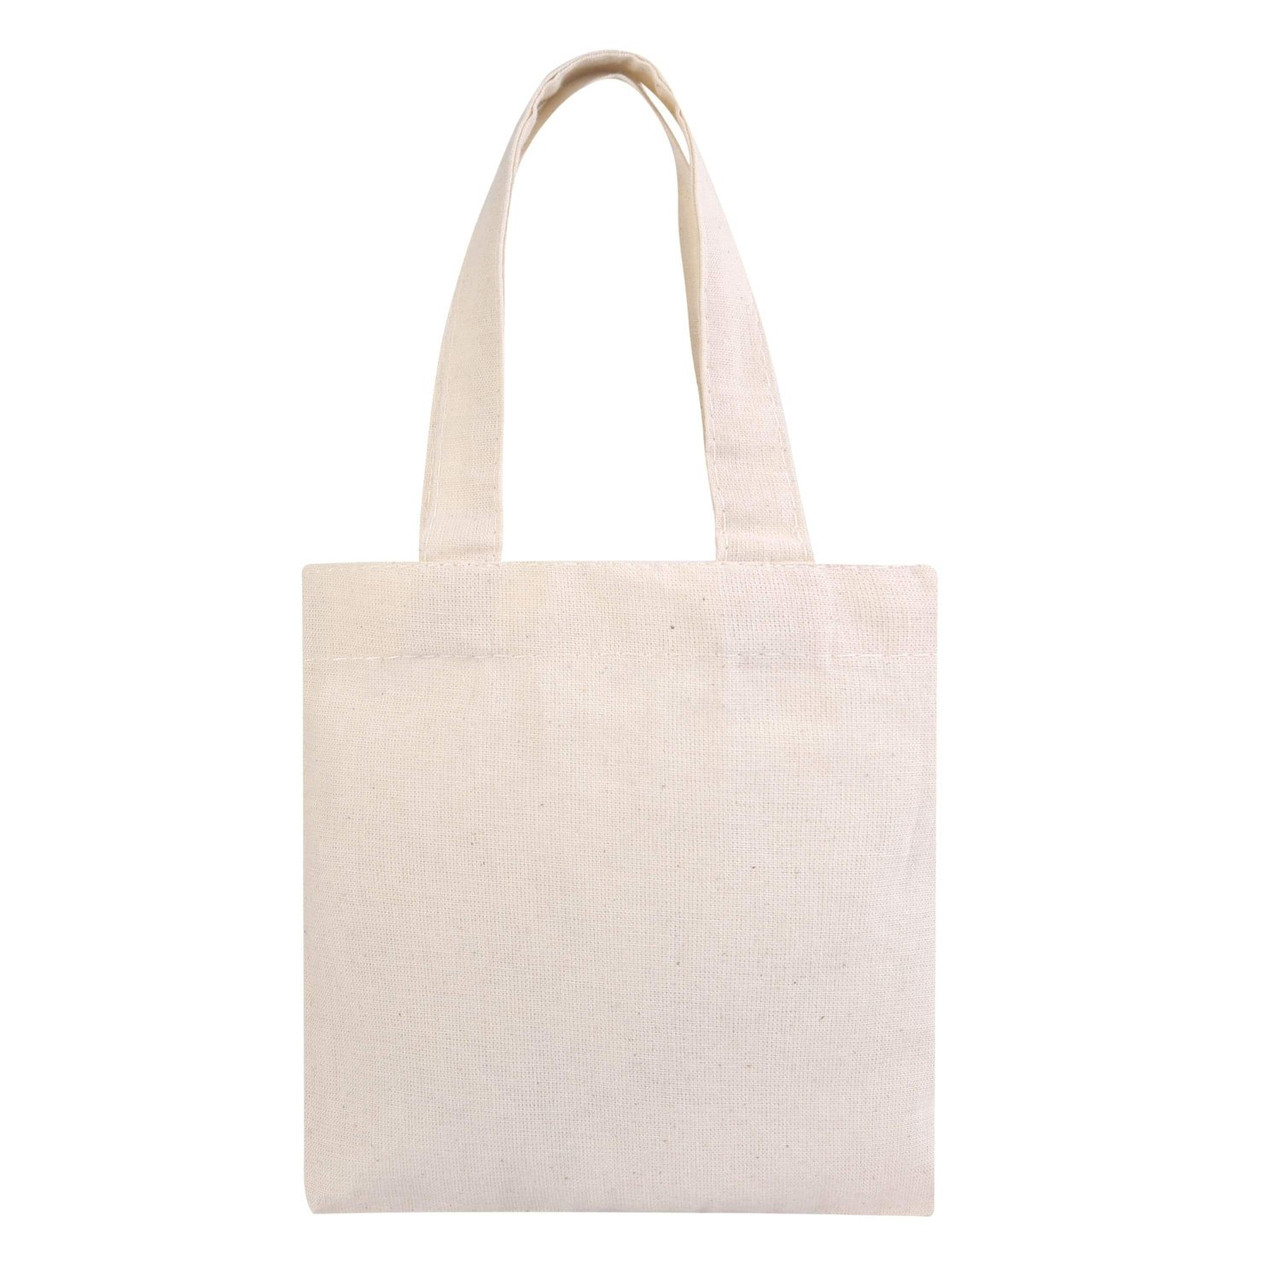 Wholesale Tote Bags,Canvas Tote bags,Cheap tote Bags,Cheap Canvas Bags